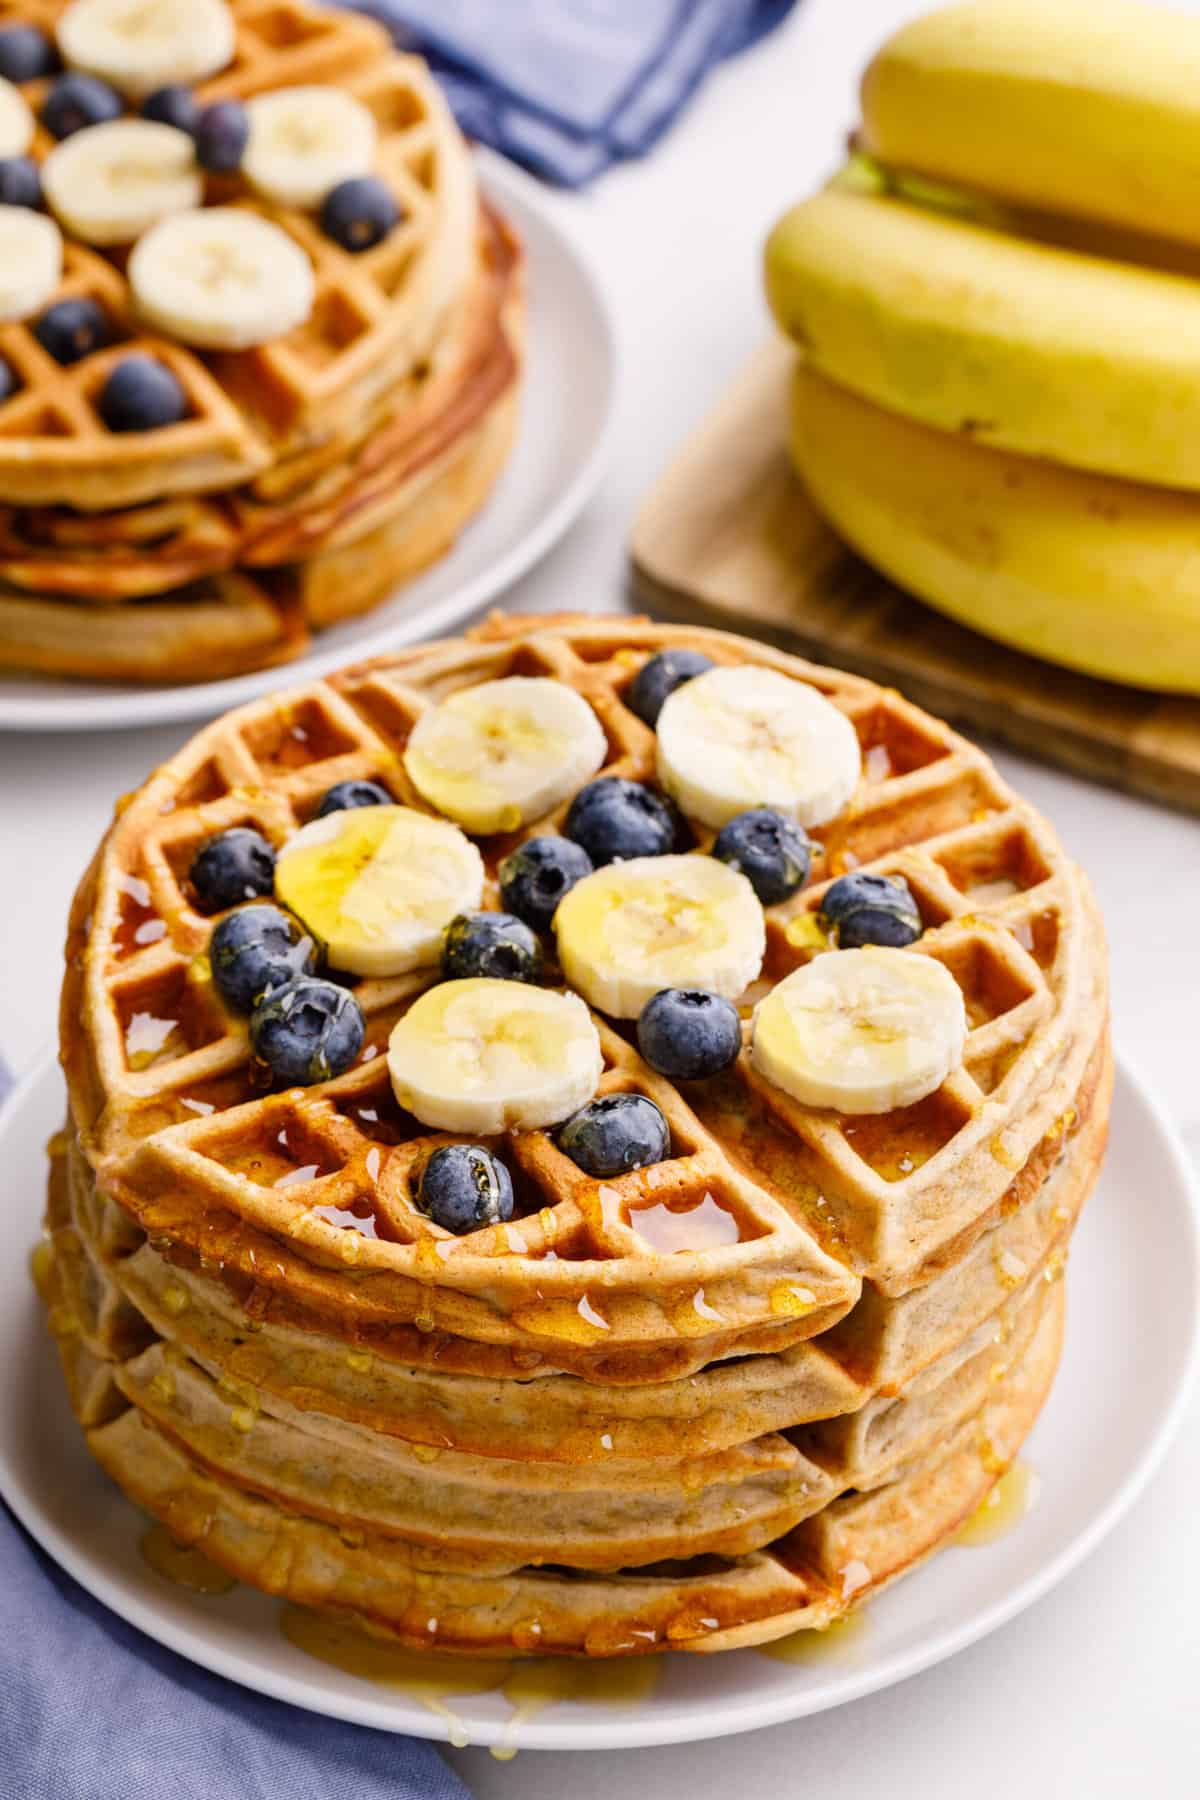 stack of four banana waffles topped with fresh sliced bananas and blueberries with syrup served on a white round plate